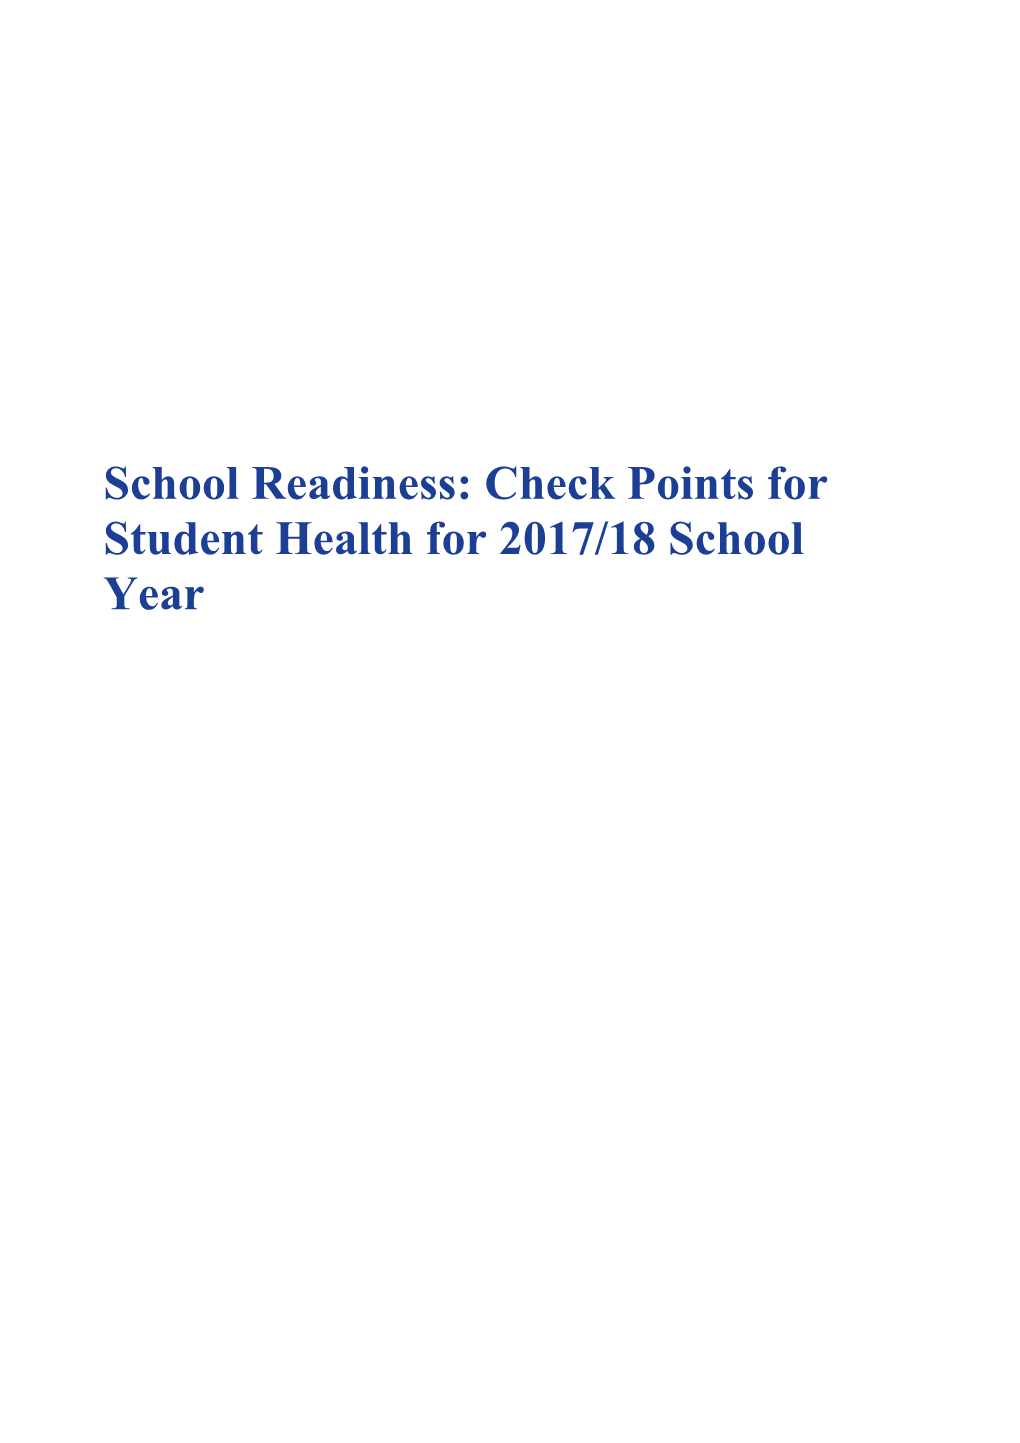 School Readiness: Check Points for Student Health for 2017/18 School Year